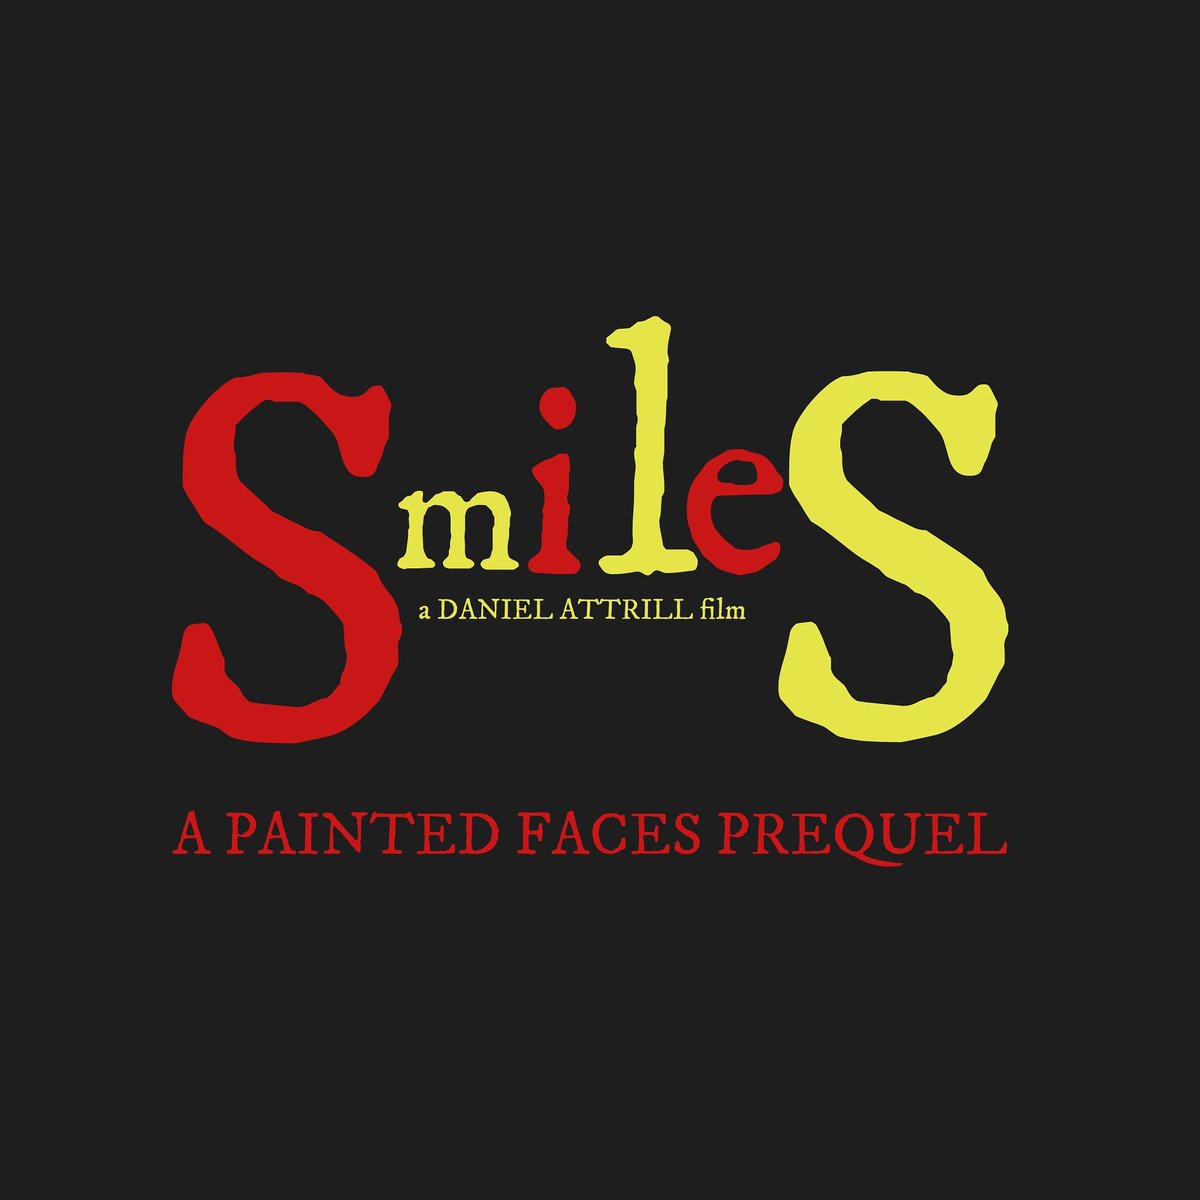 Coming Soon....

#paintedfaces #horror #shortfilm #clowns #scary #filmmaker #writer #producer #director #ukfilm #indiefilm #supportindiefilm #smiles